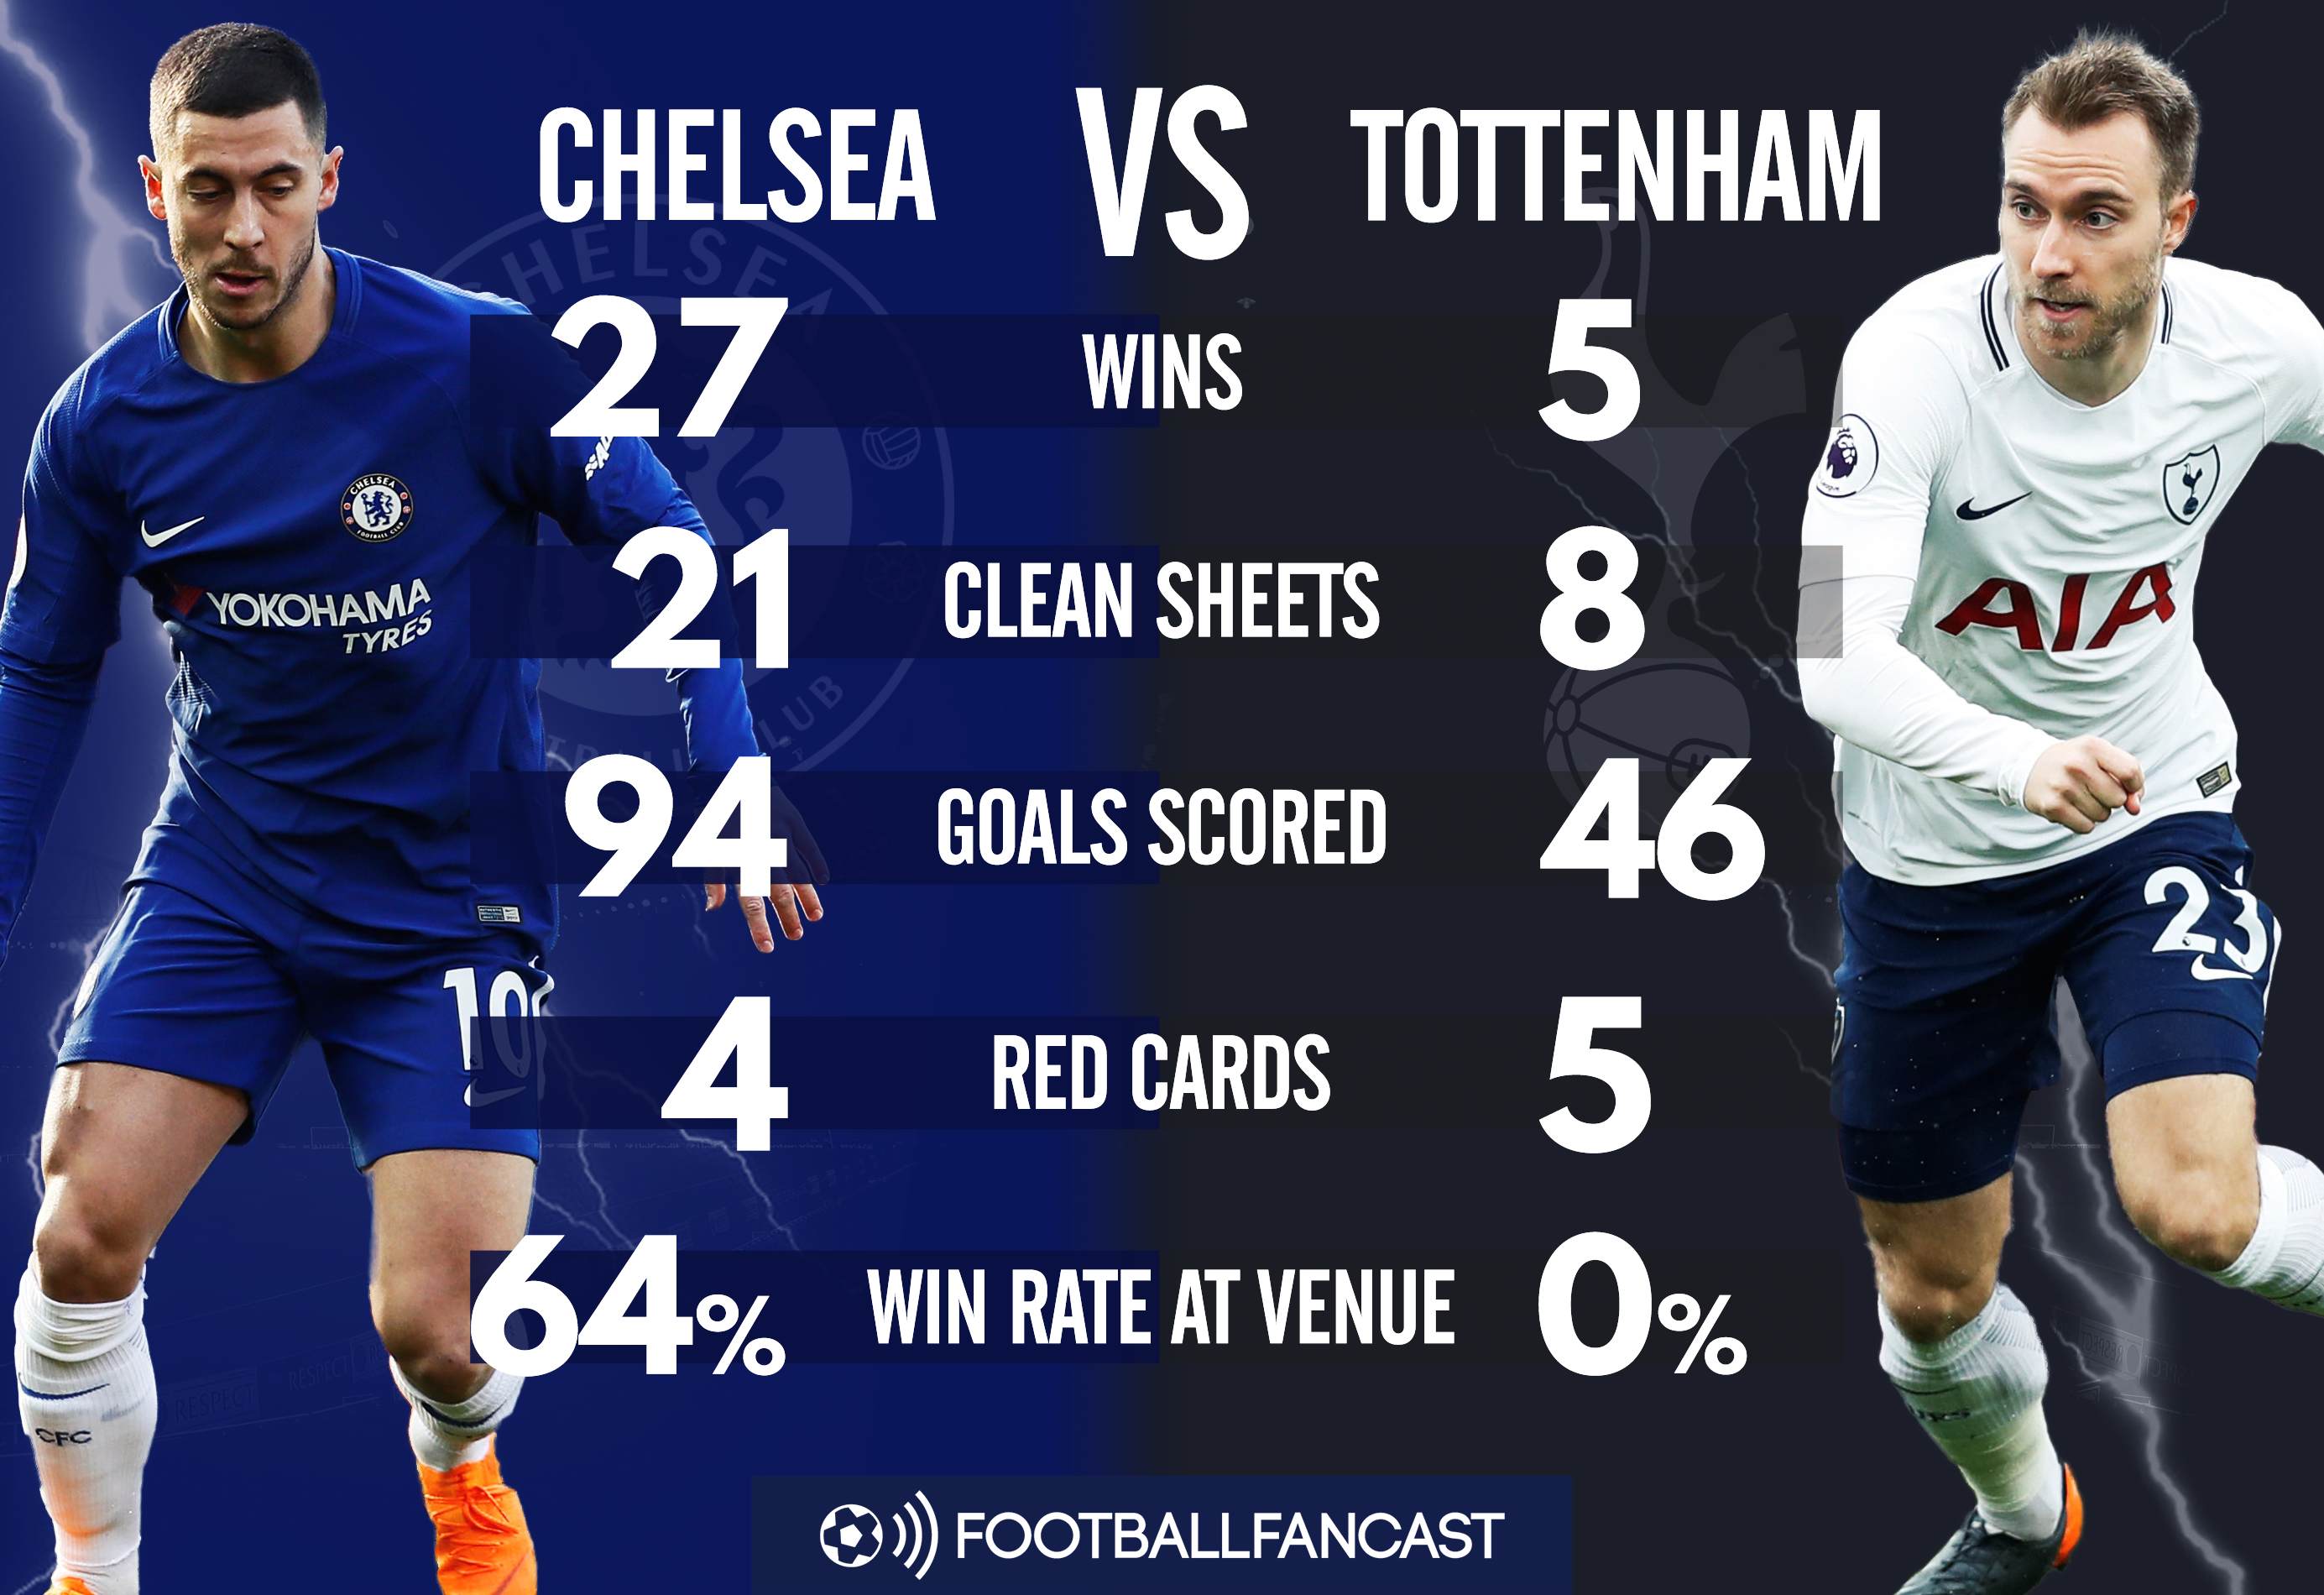 Chelsea and Tottenham's Head-to-Head record in the Premier League